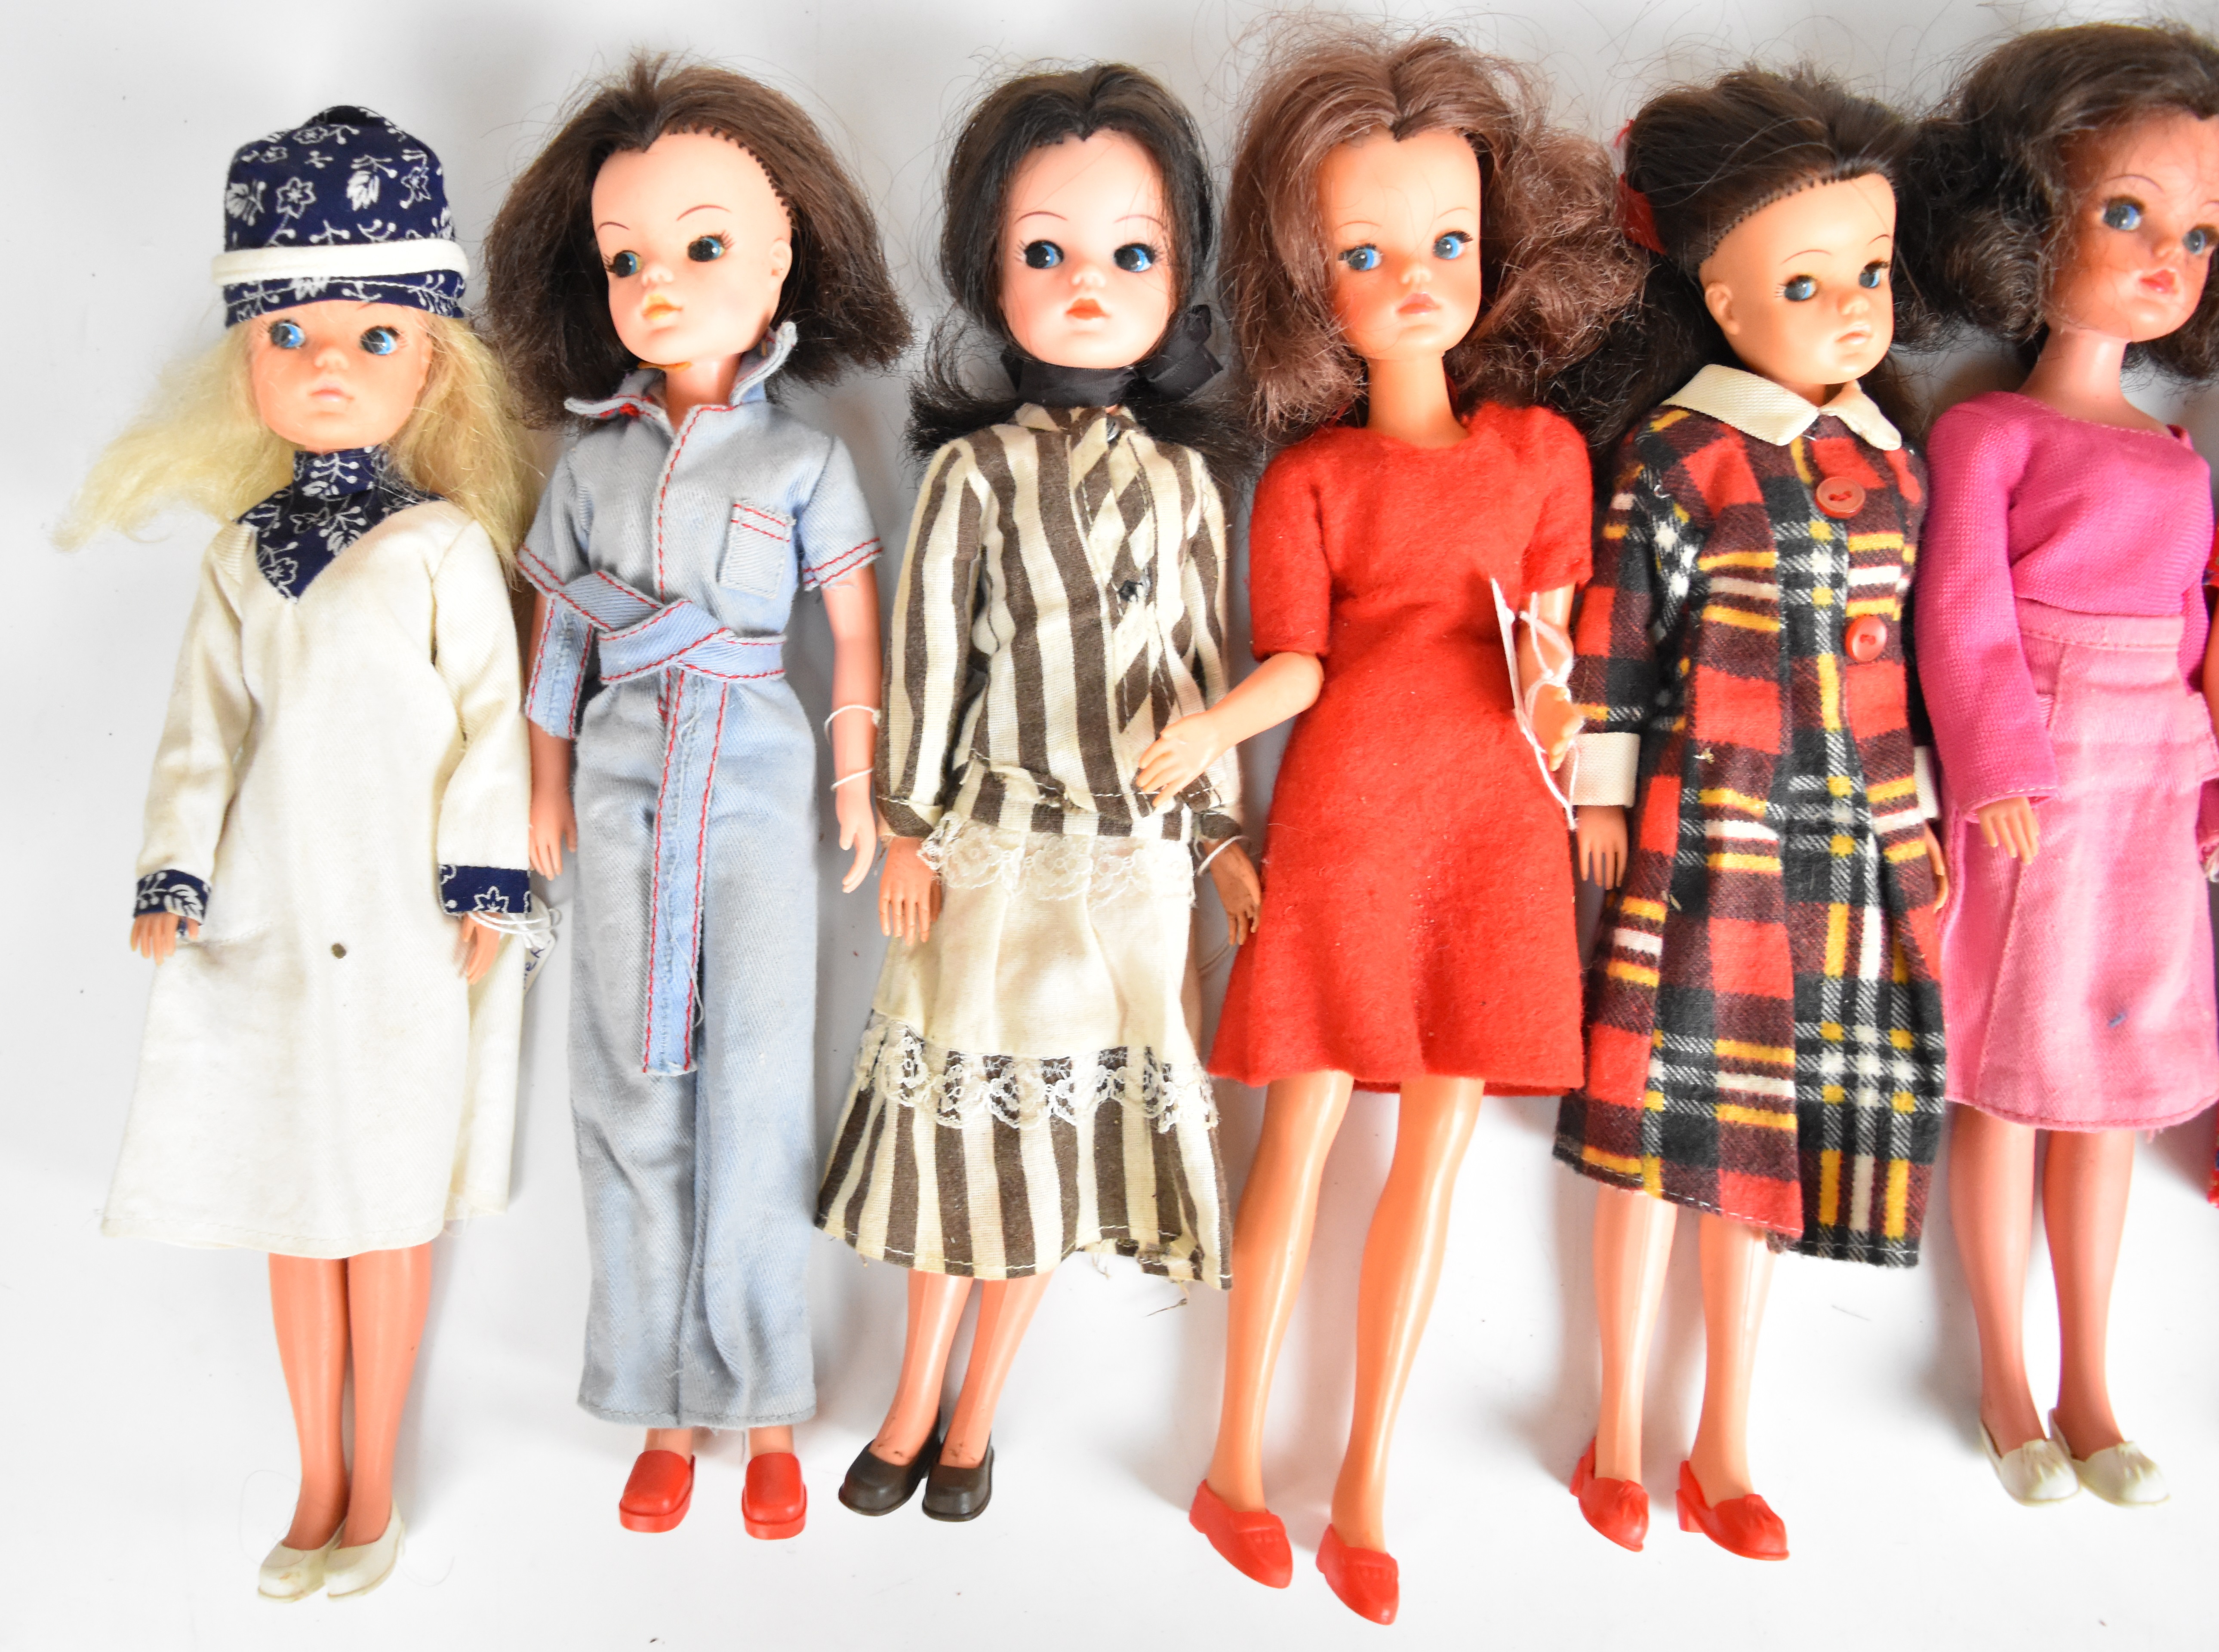 Ten vintage Sindy dolls by Pedigree dressed in original 1970's outfits. - Image 4 of 4